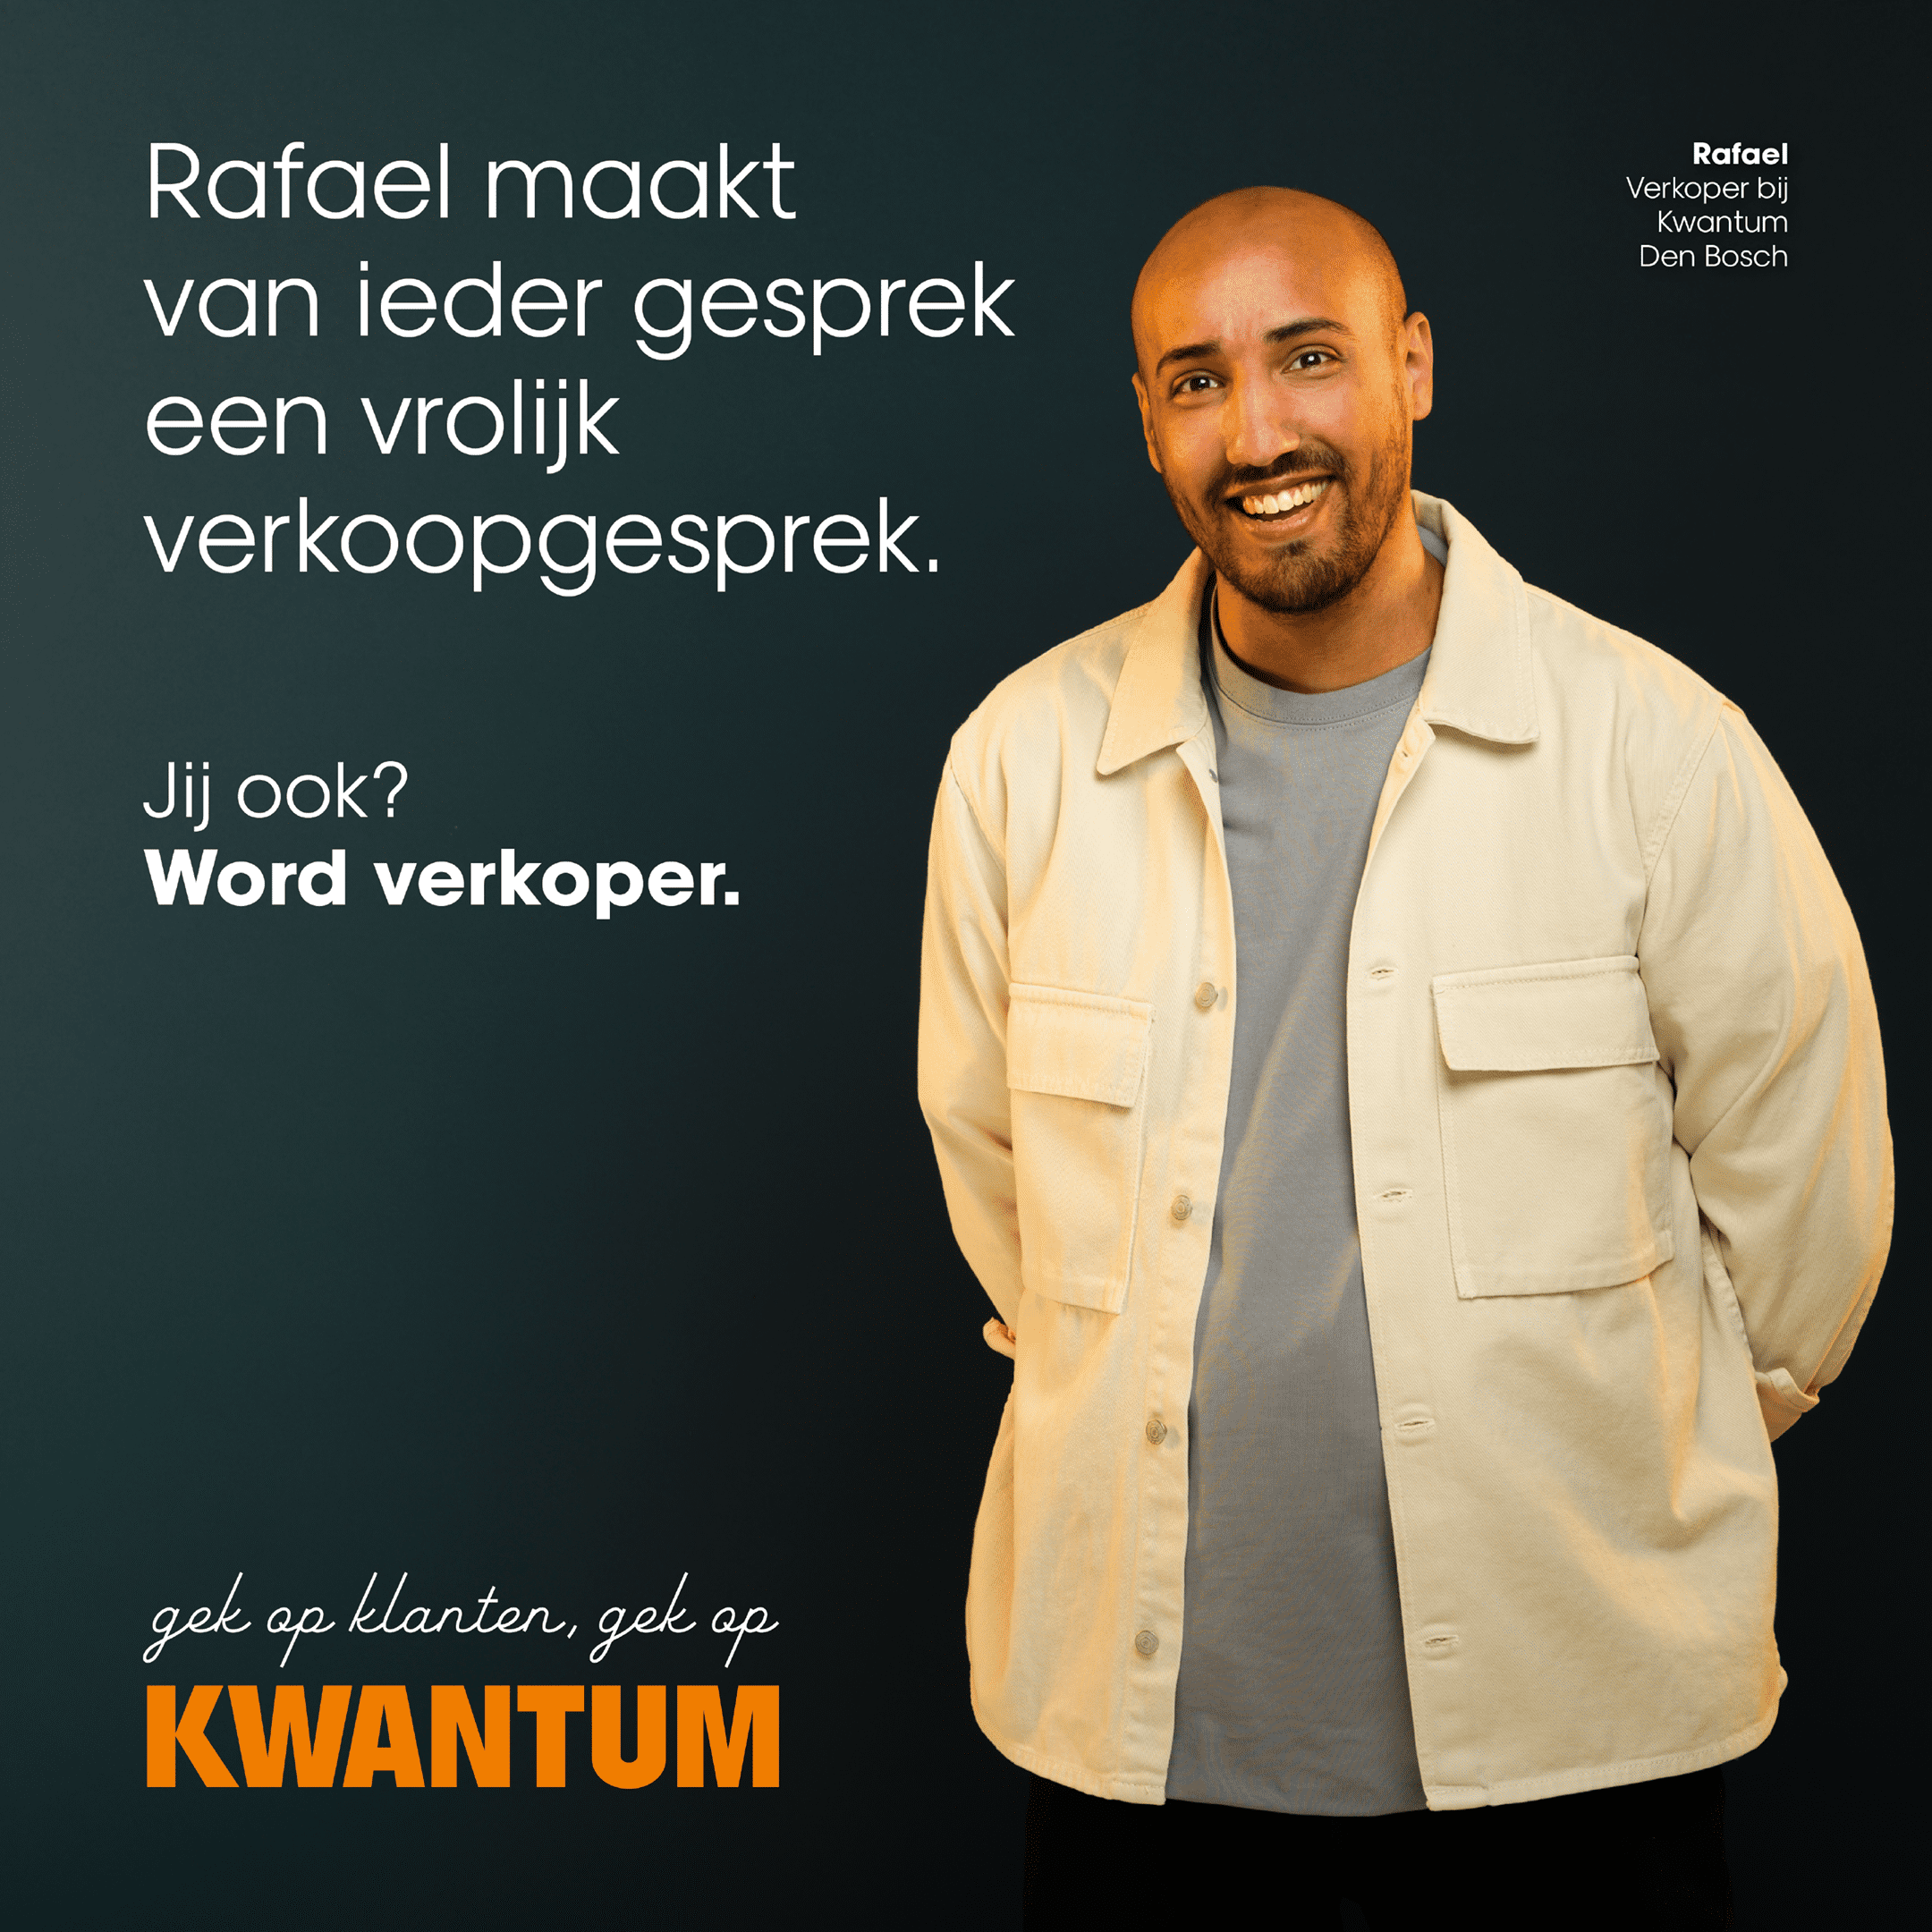 wervingscampagne Kwantum